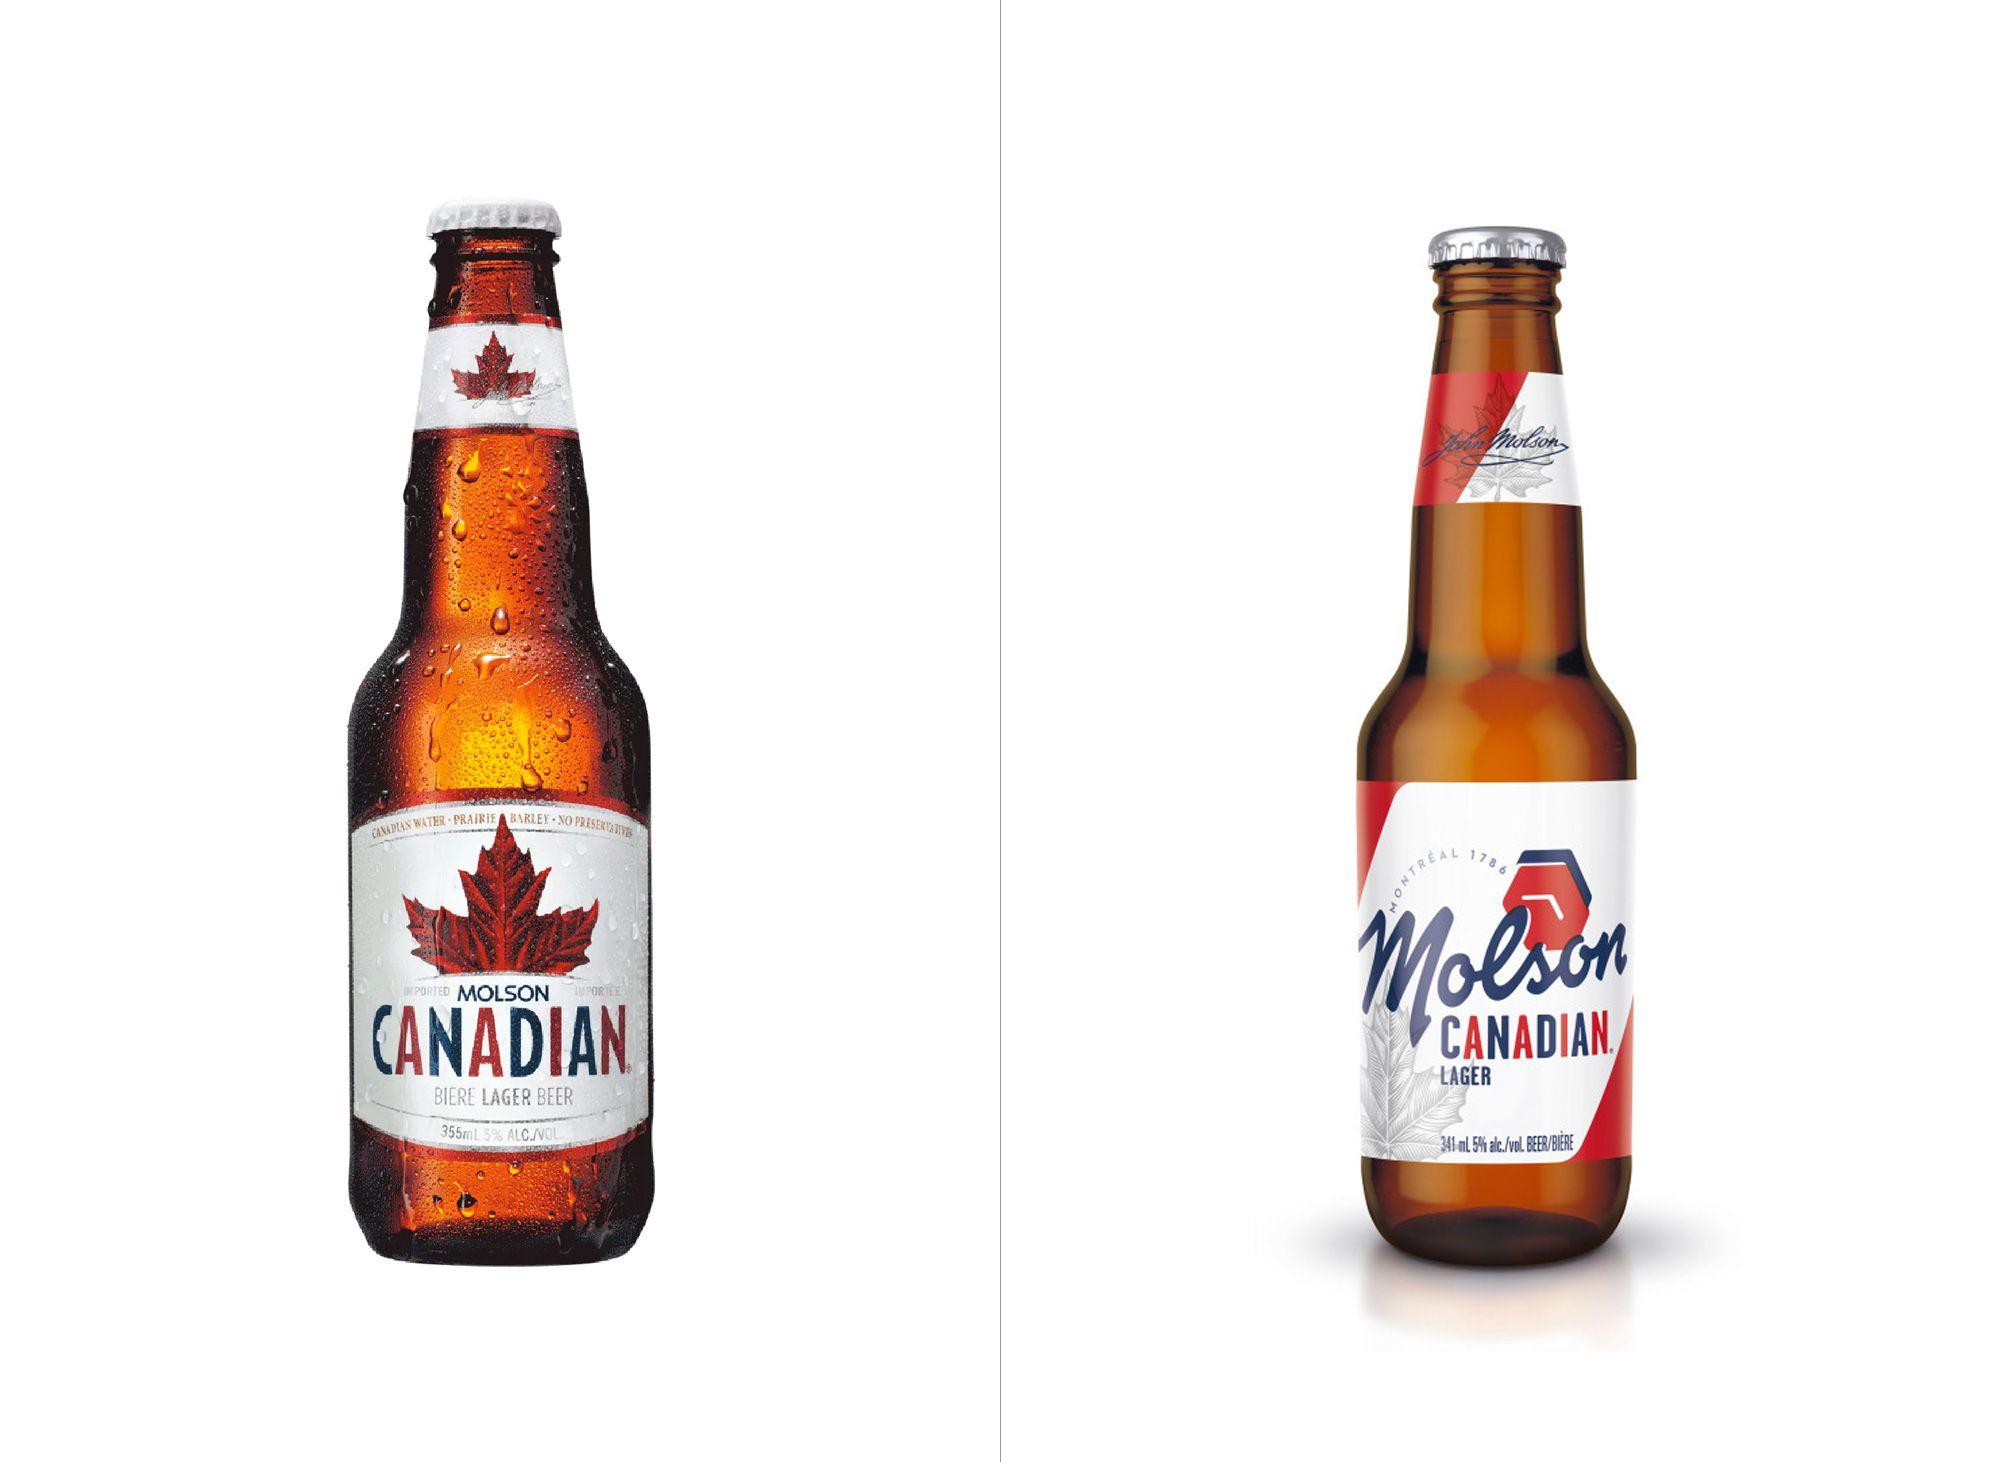 Molson Logo - Brand New: New Logo and Packaging for Molson Brands by BrandOpus